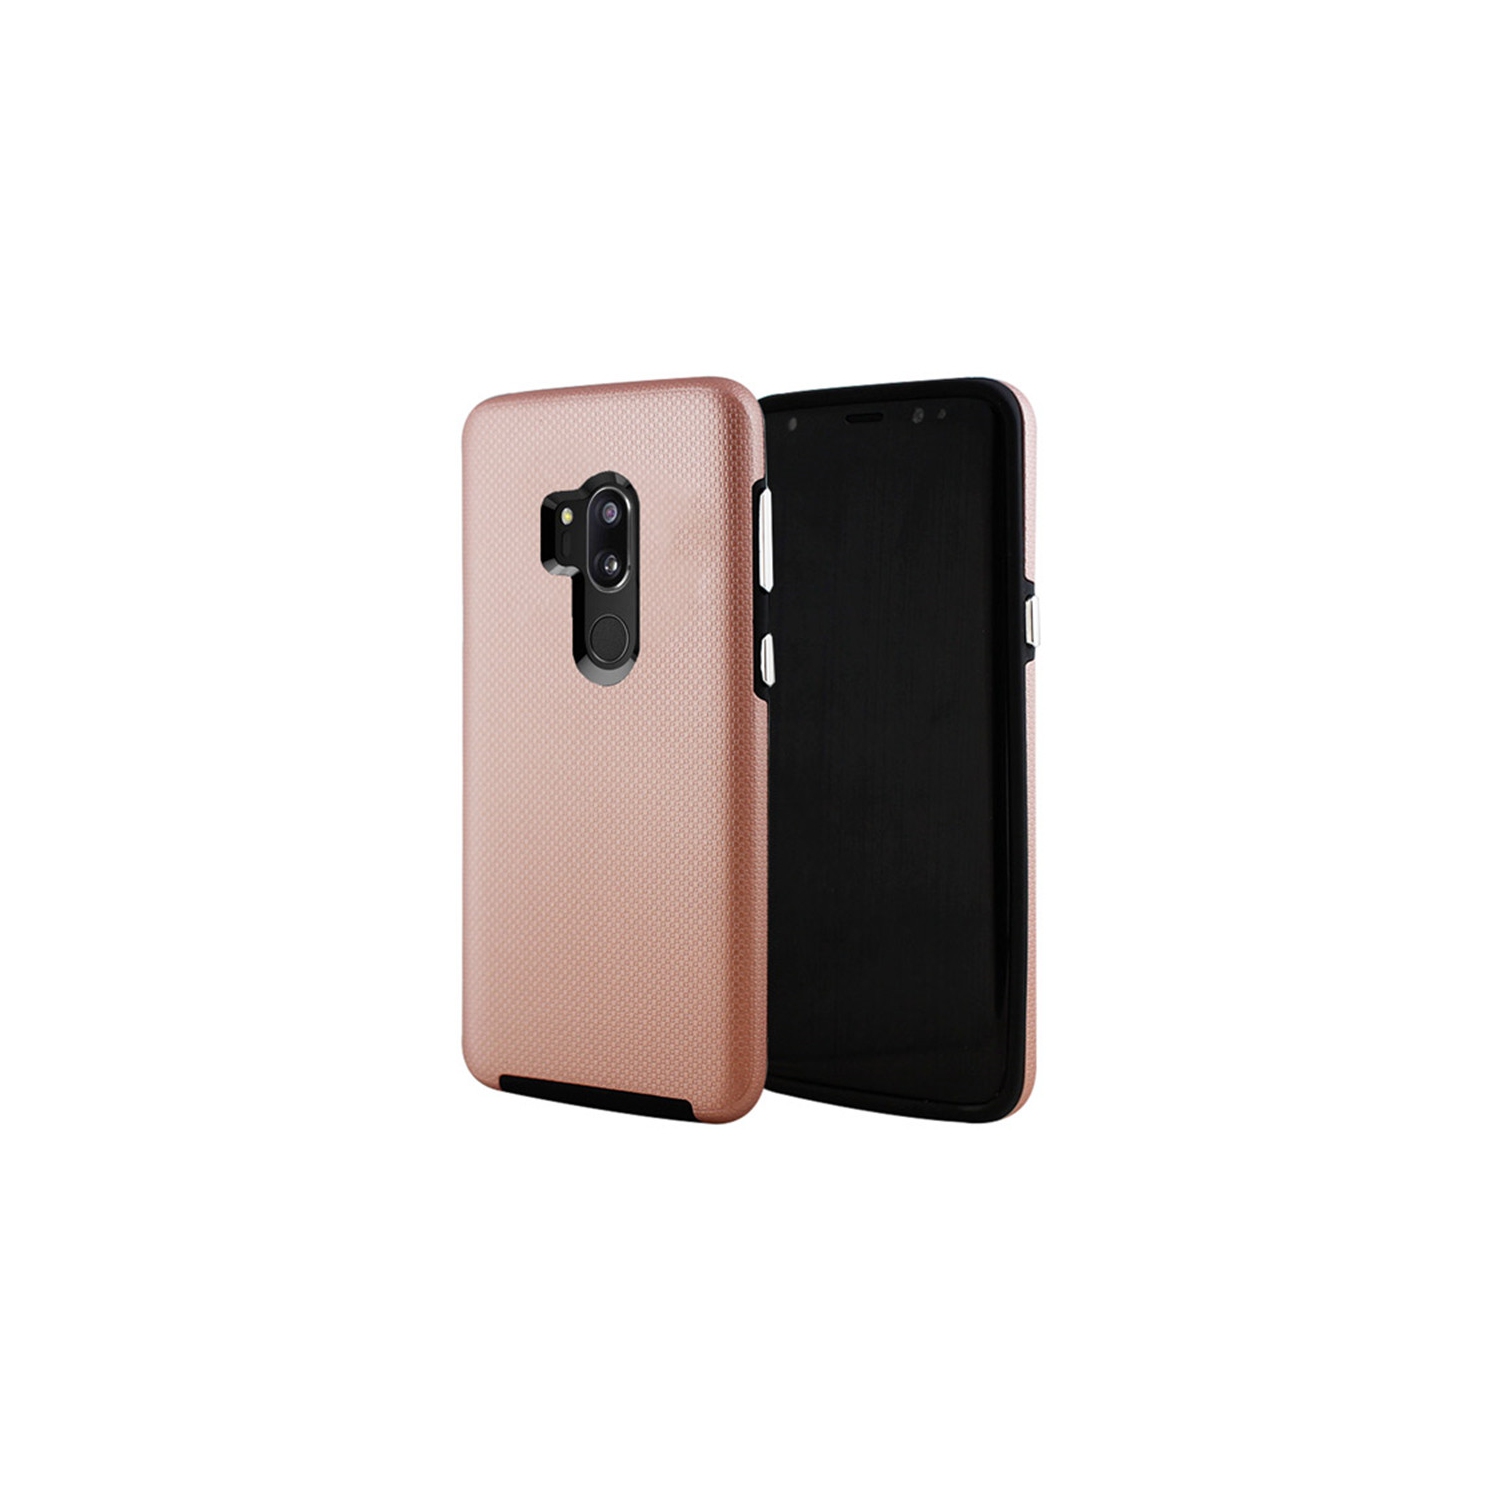 【CSmart】 Slim Fitted Hybrid Hard PC Shell Shockproof Scratch Resistant Case Cover for LG G7 ThinQ / G7 One, Rose Gold